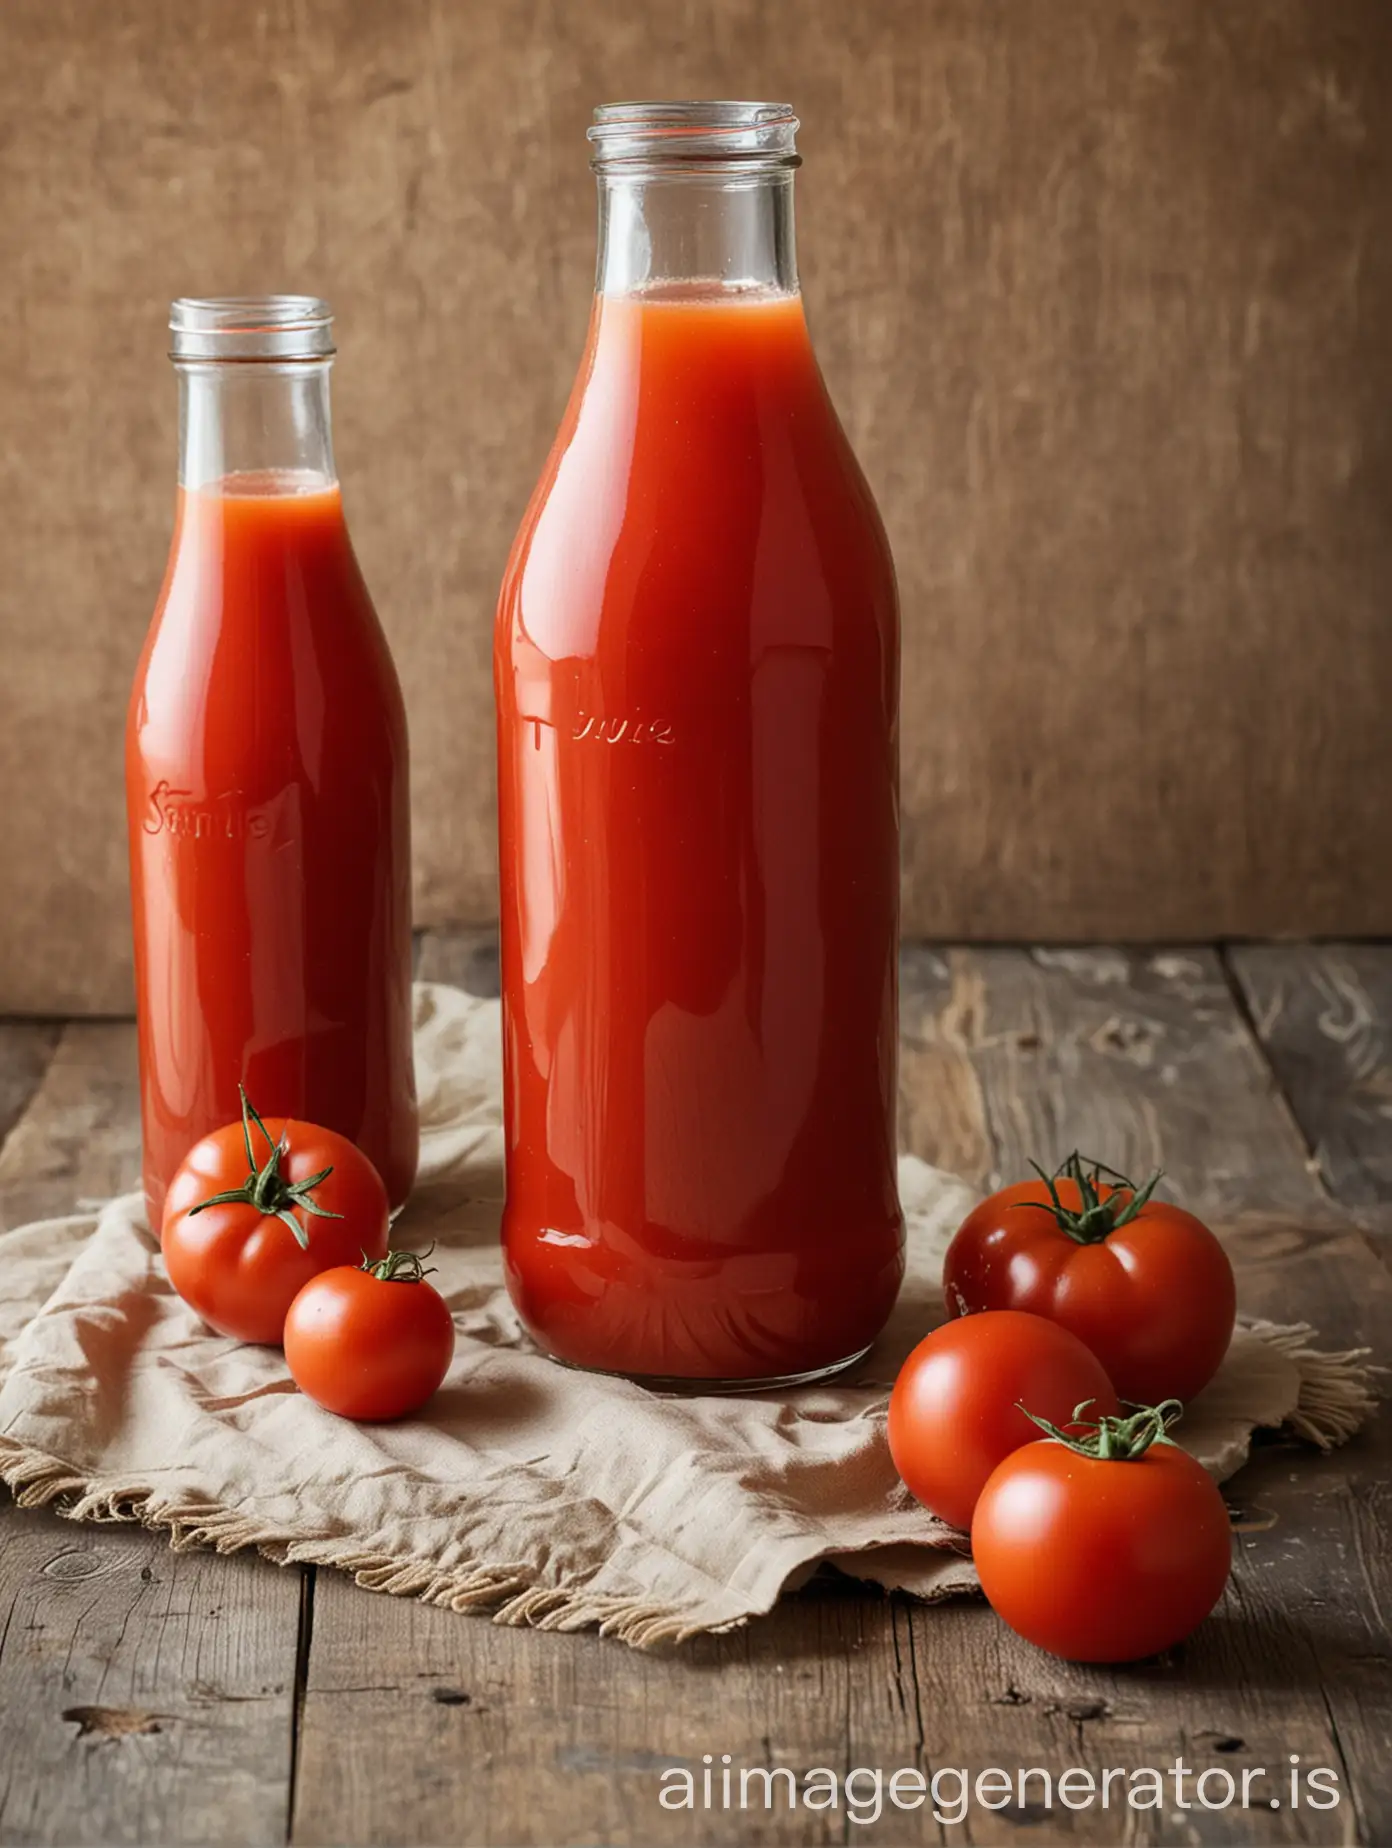 Homemade-Bottled-Tomato-Juice-for-Fresh-Flavors-and-Convenience